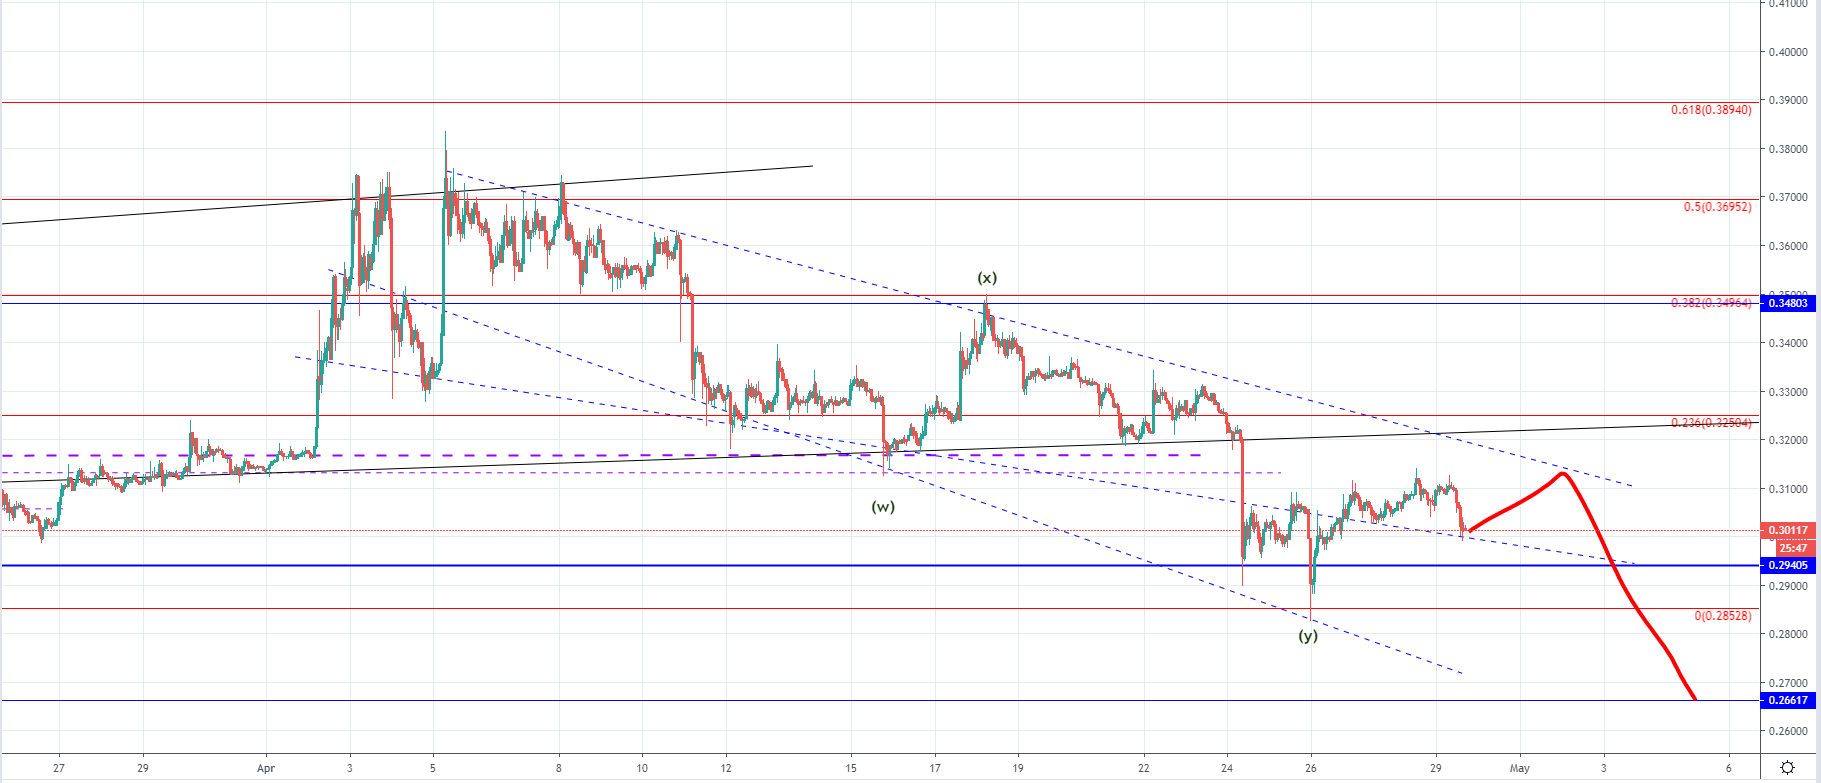 Ripple XRP Price Prediction: Projected Analysis of 2019 & 2020